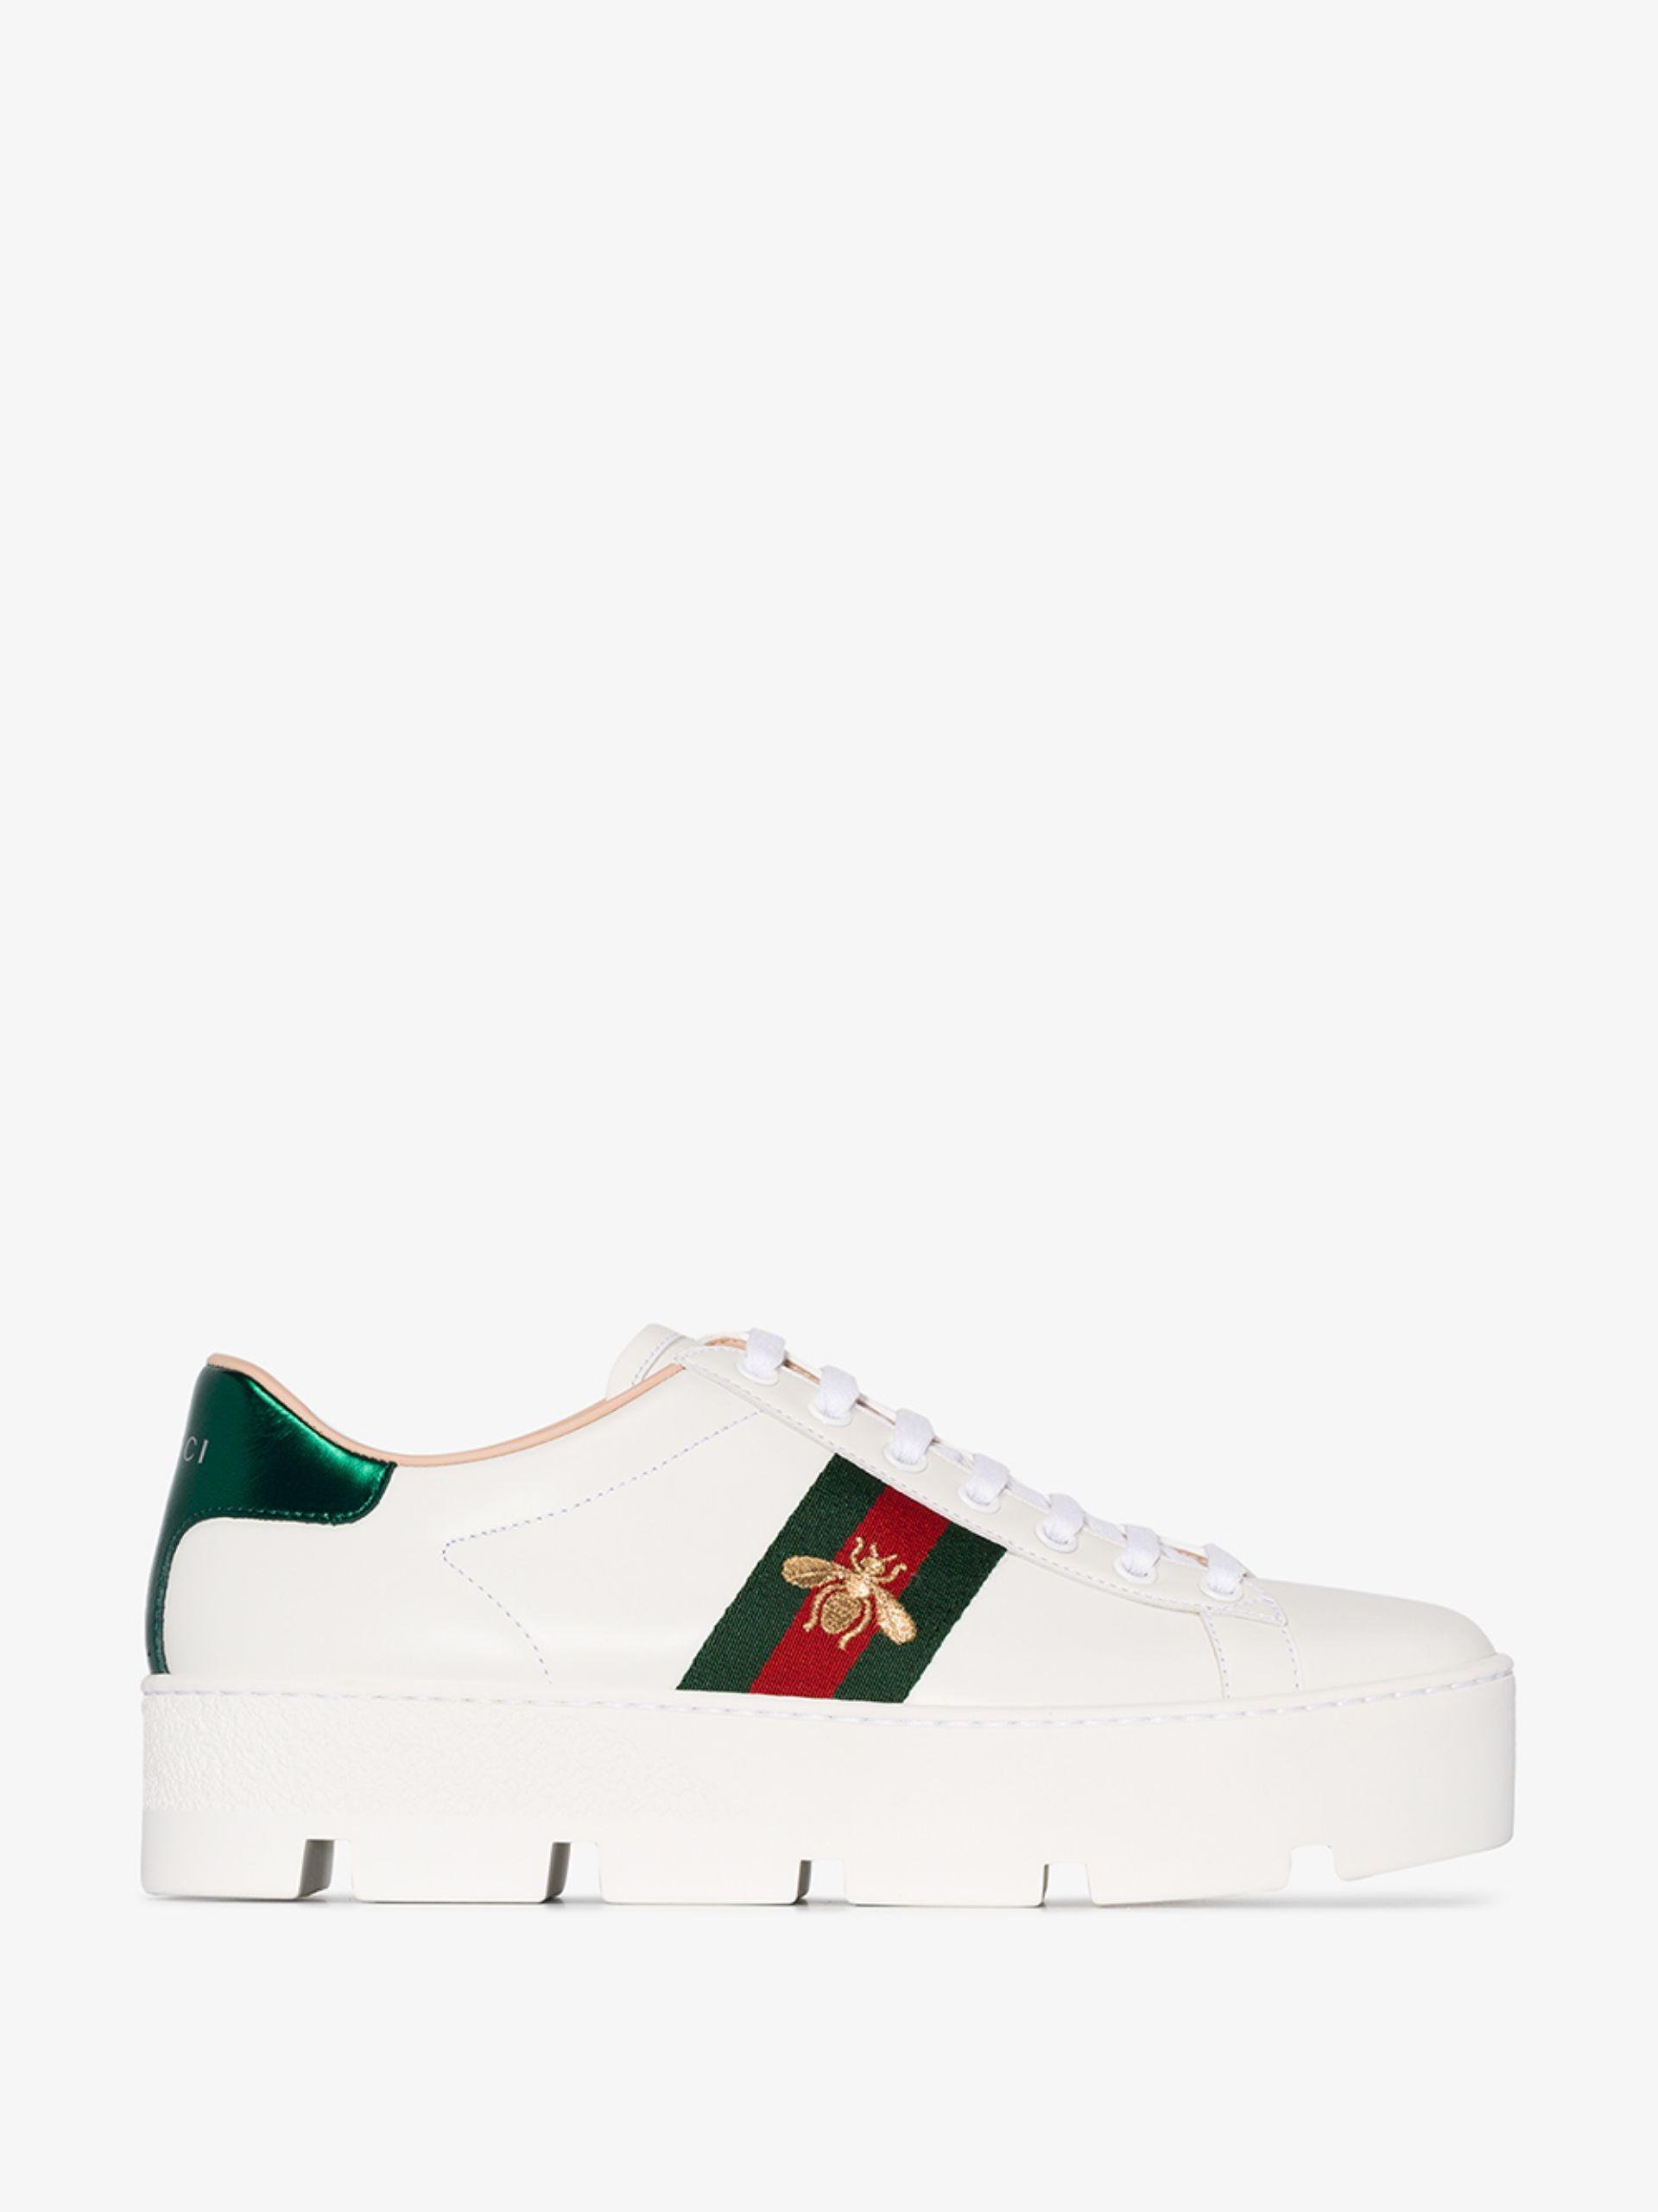 Gucci Ace Appliquéd Webbing-trimmed Leather Sneakers - White